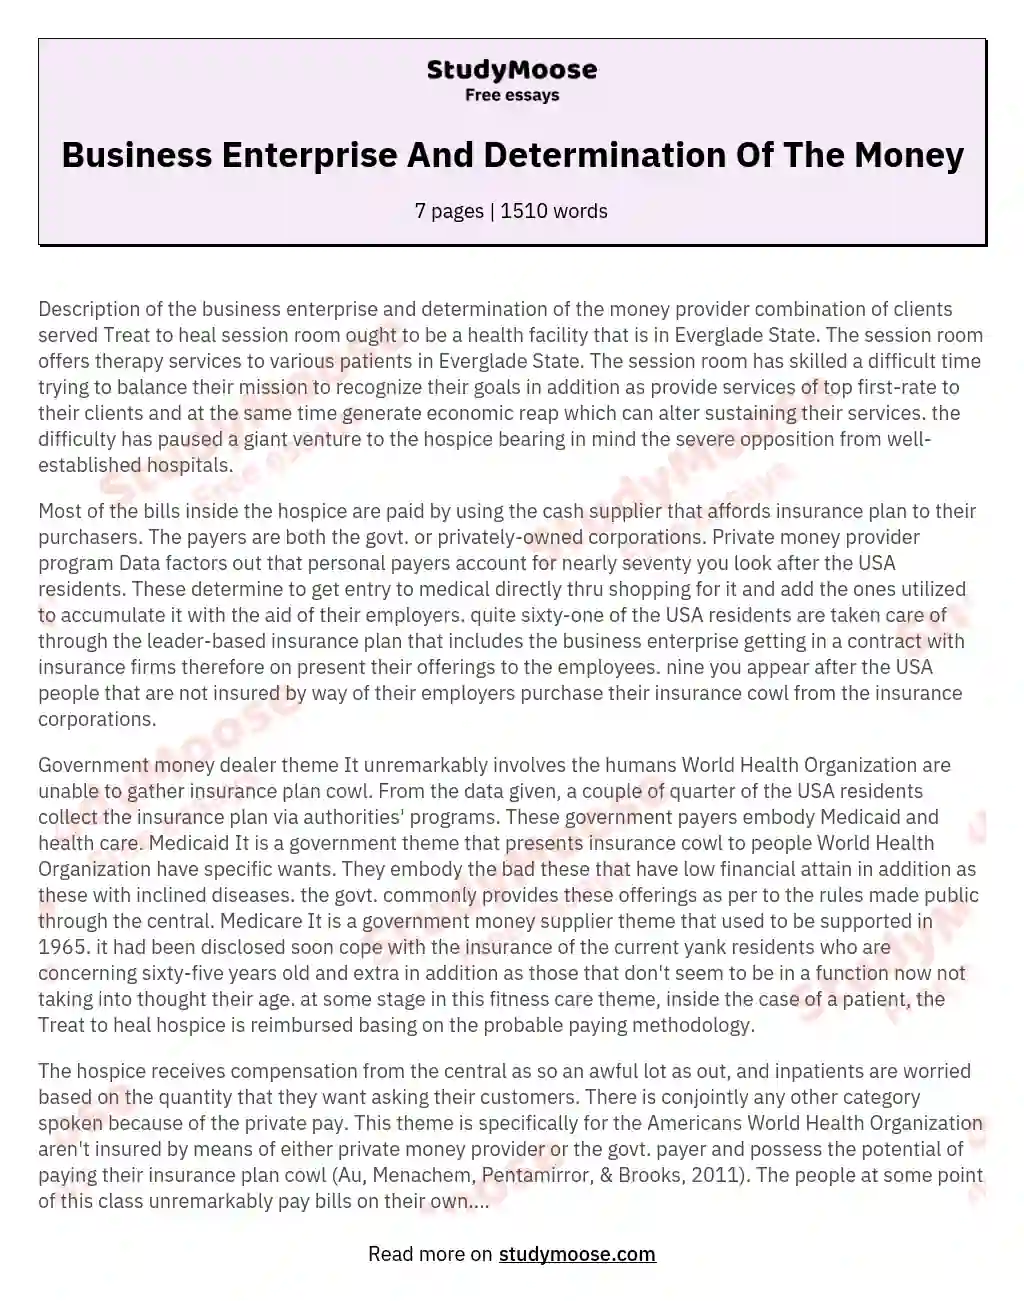 Business Enterprise And Determination Of The Money essay